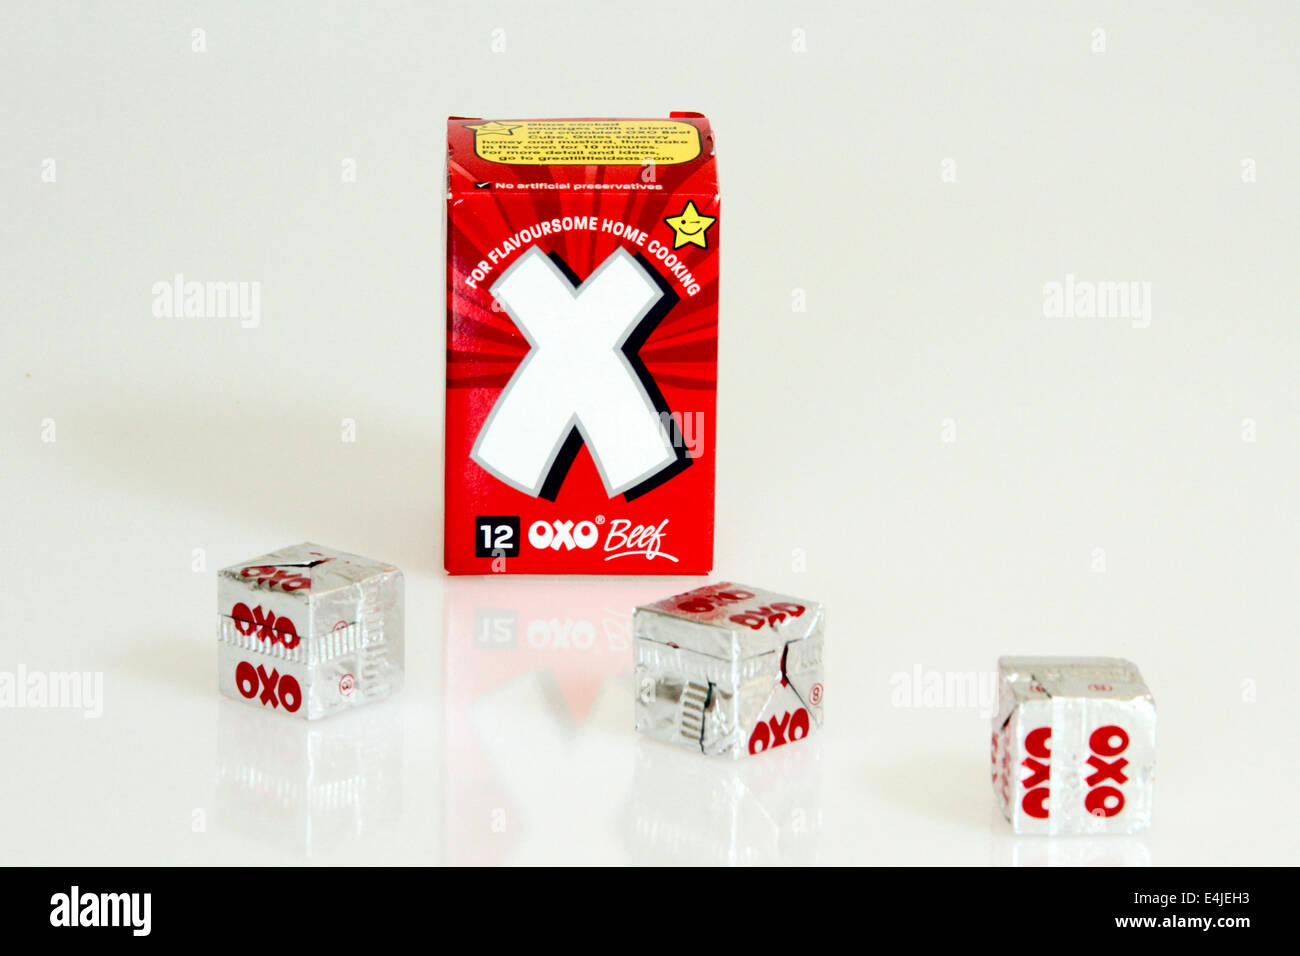 Box of OXO cubes on a light colored background Stock Photo